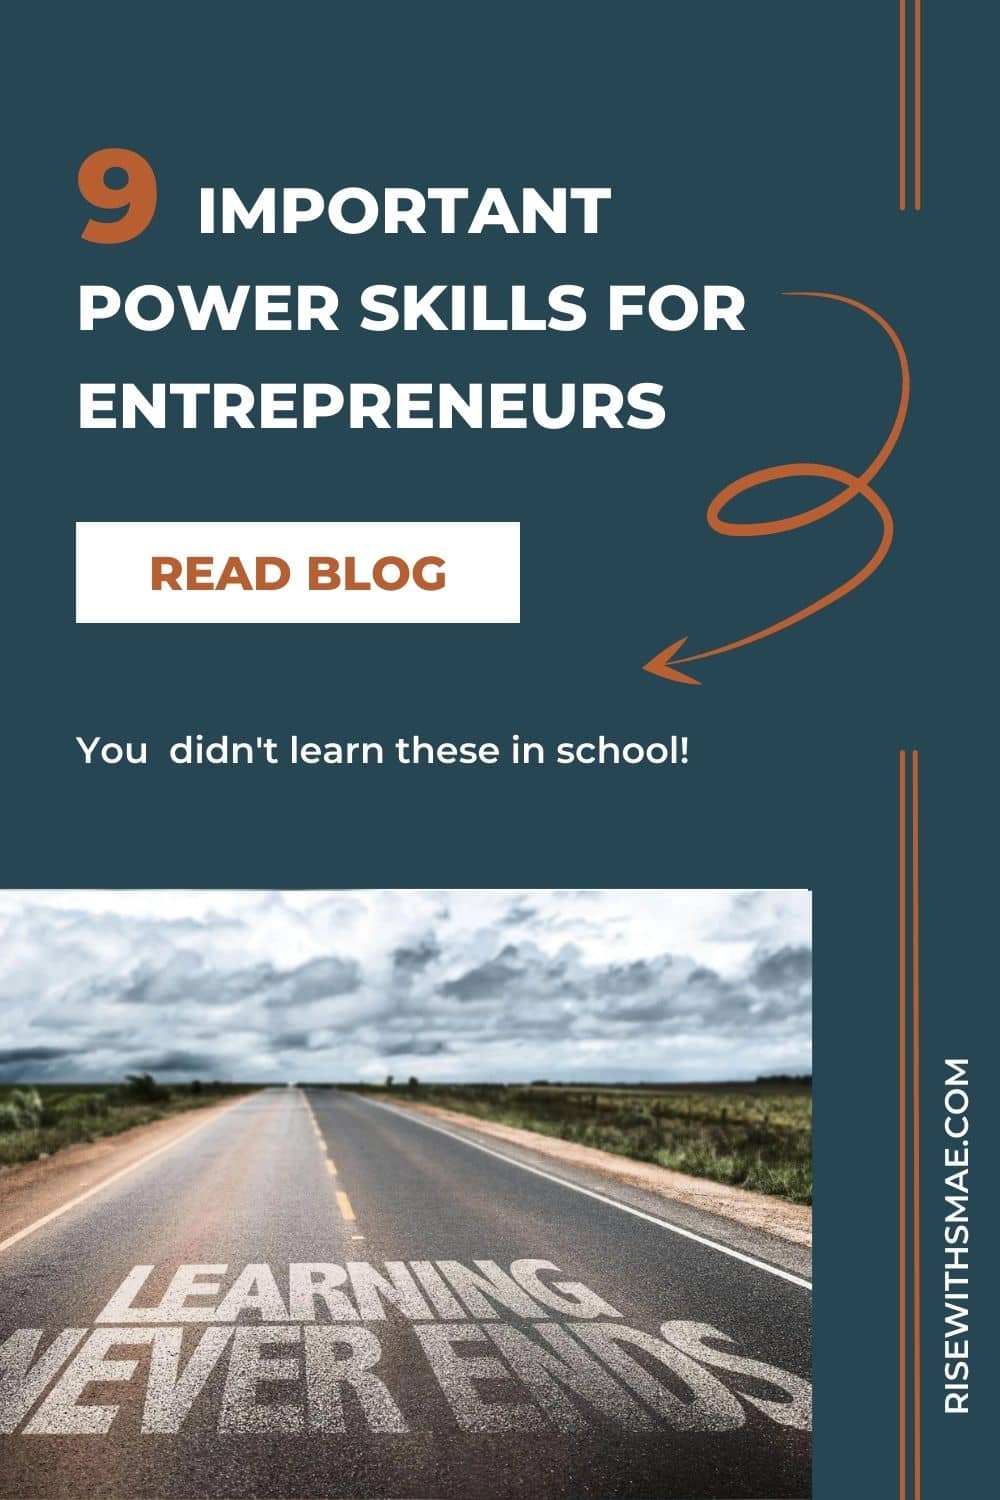 Entrepreneurship: 9 Important Power Skills You Likely Didn’t Learn in School